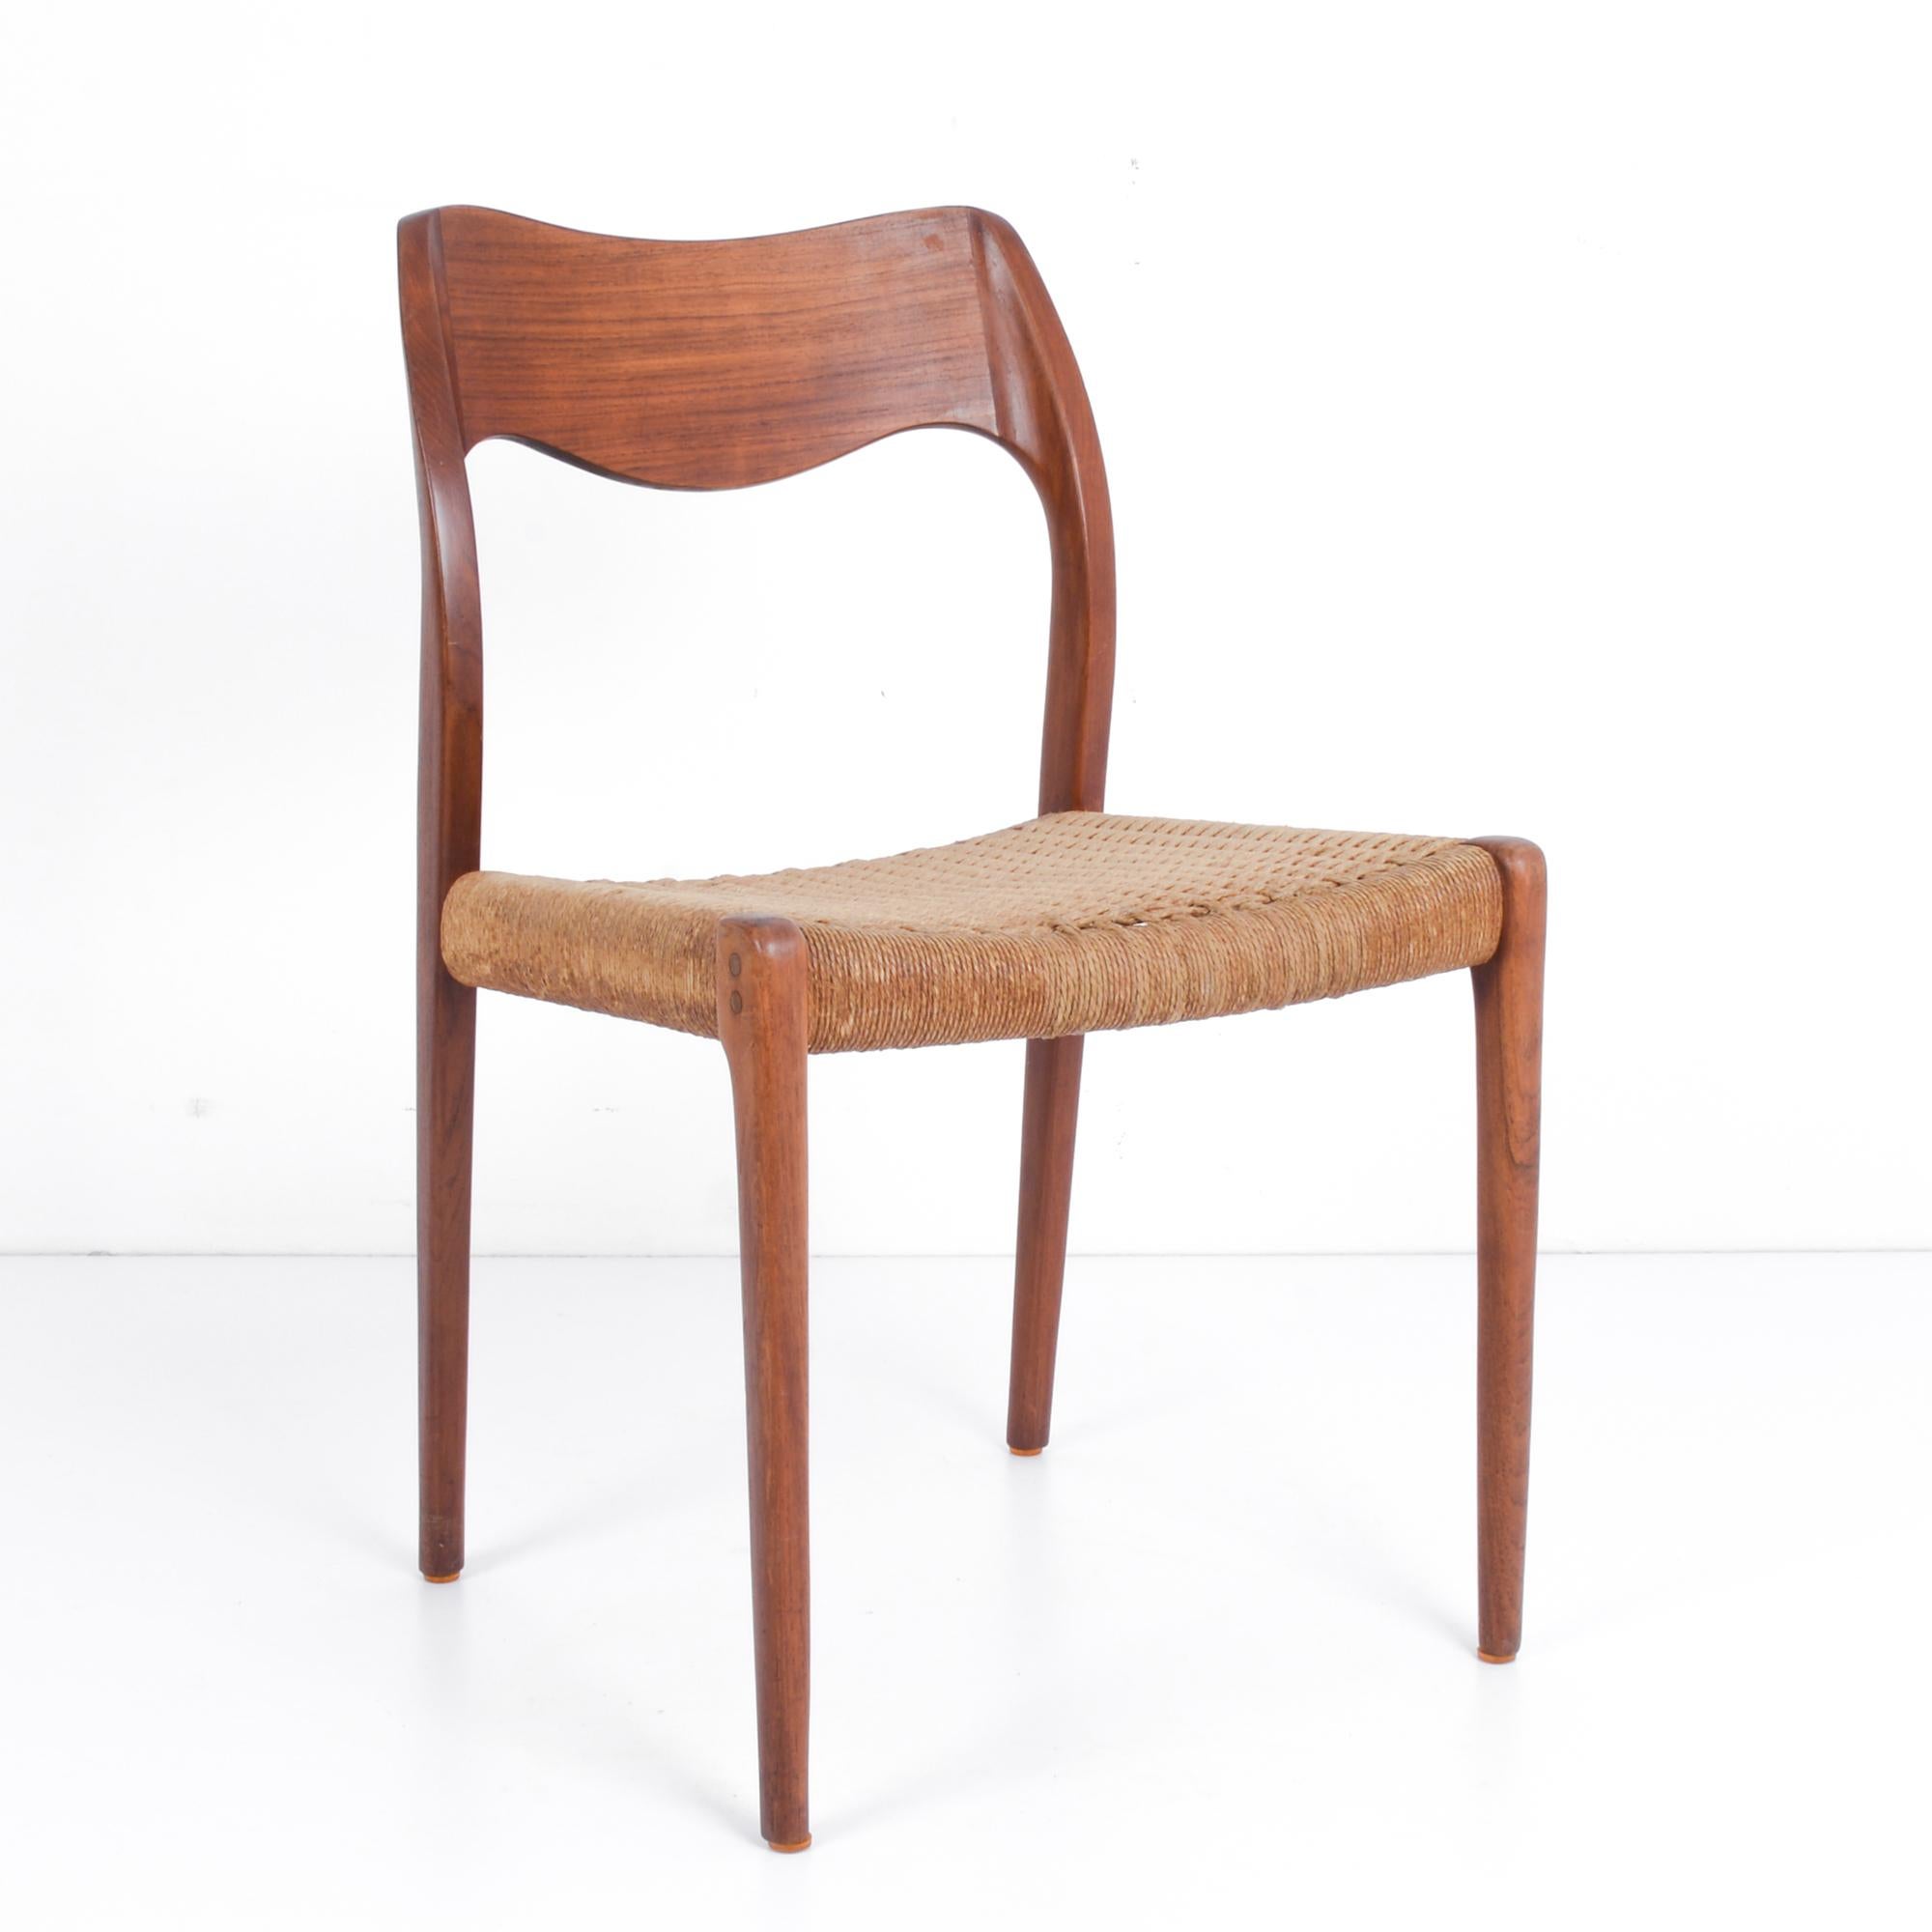 This captain’s chair designed by Arne Hovmand-Olsen was made in Denmark, circa 1960. The curved back and tapered legs of this elegant chair show off the beautiful patina of the teak. A woven seat knotted to the frame is in excellent condition and